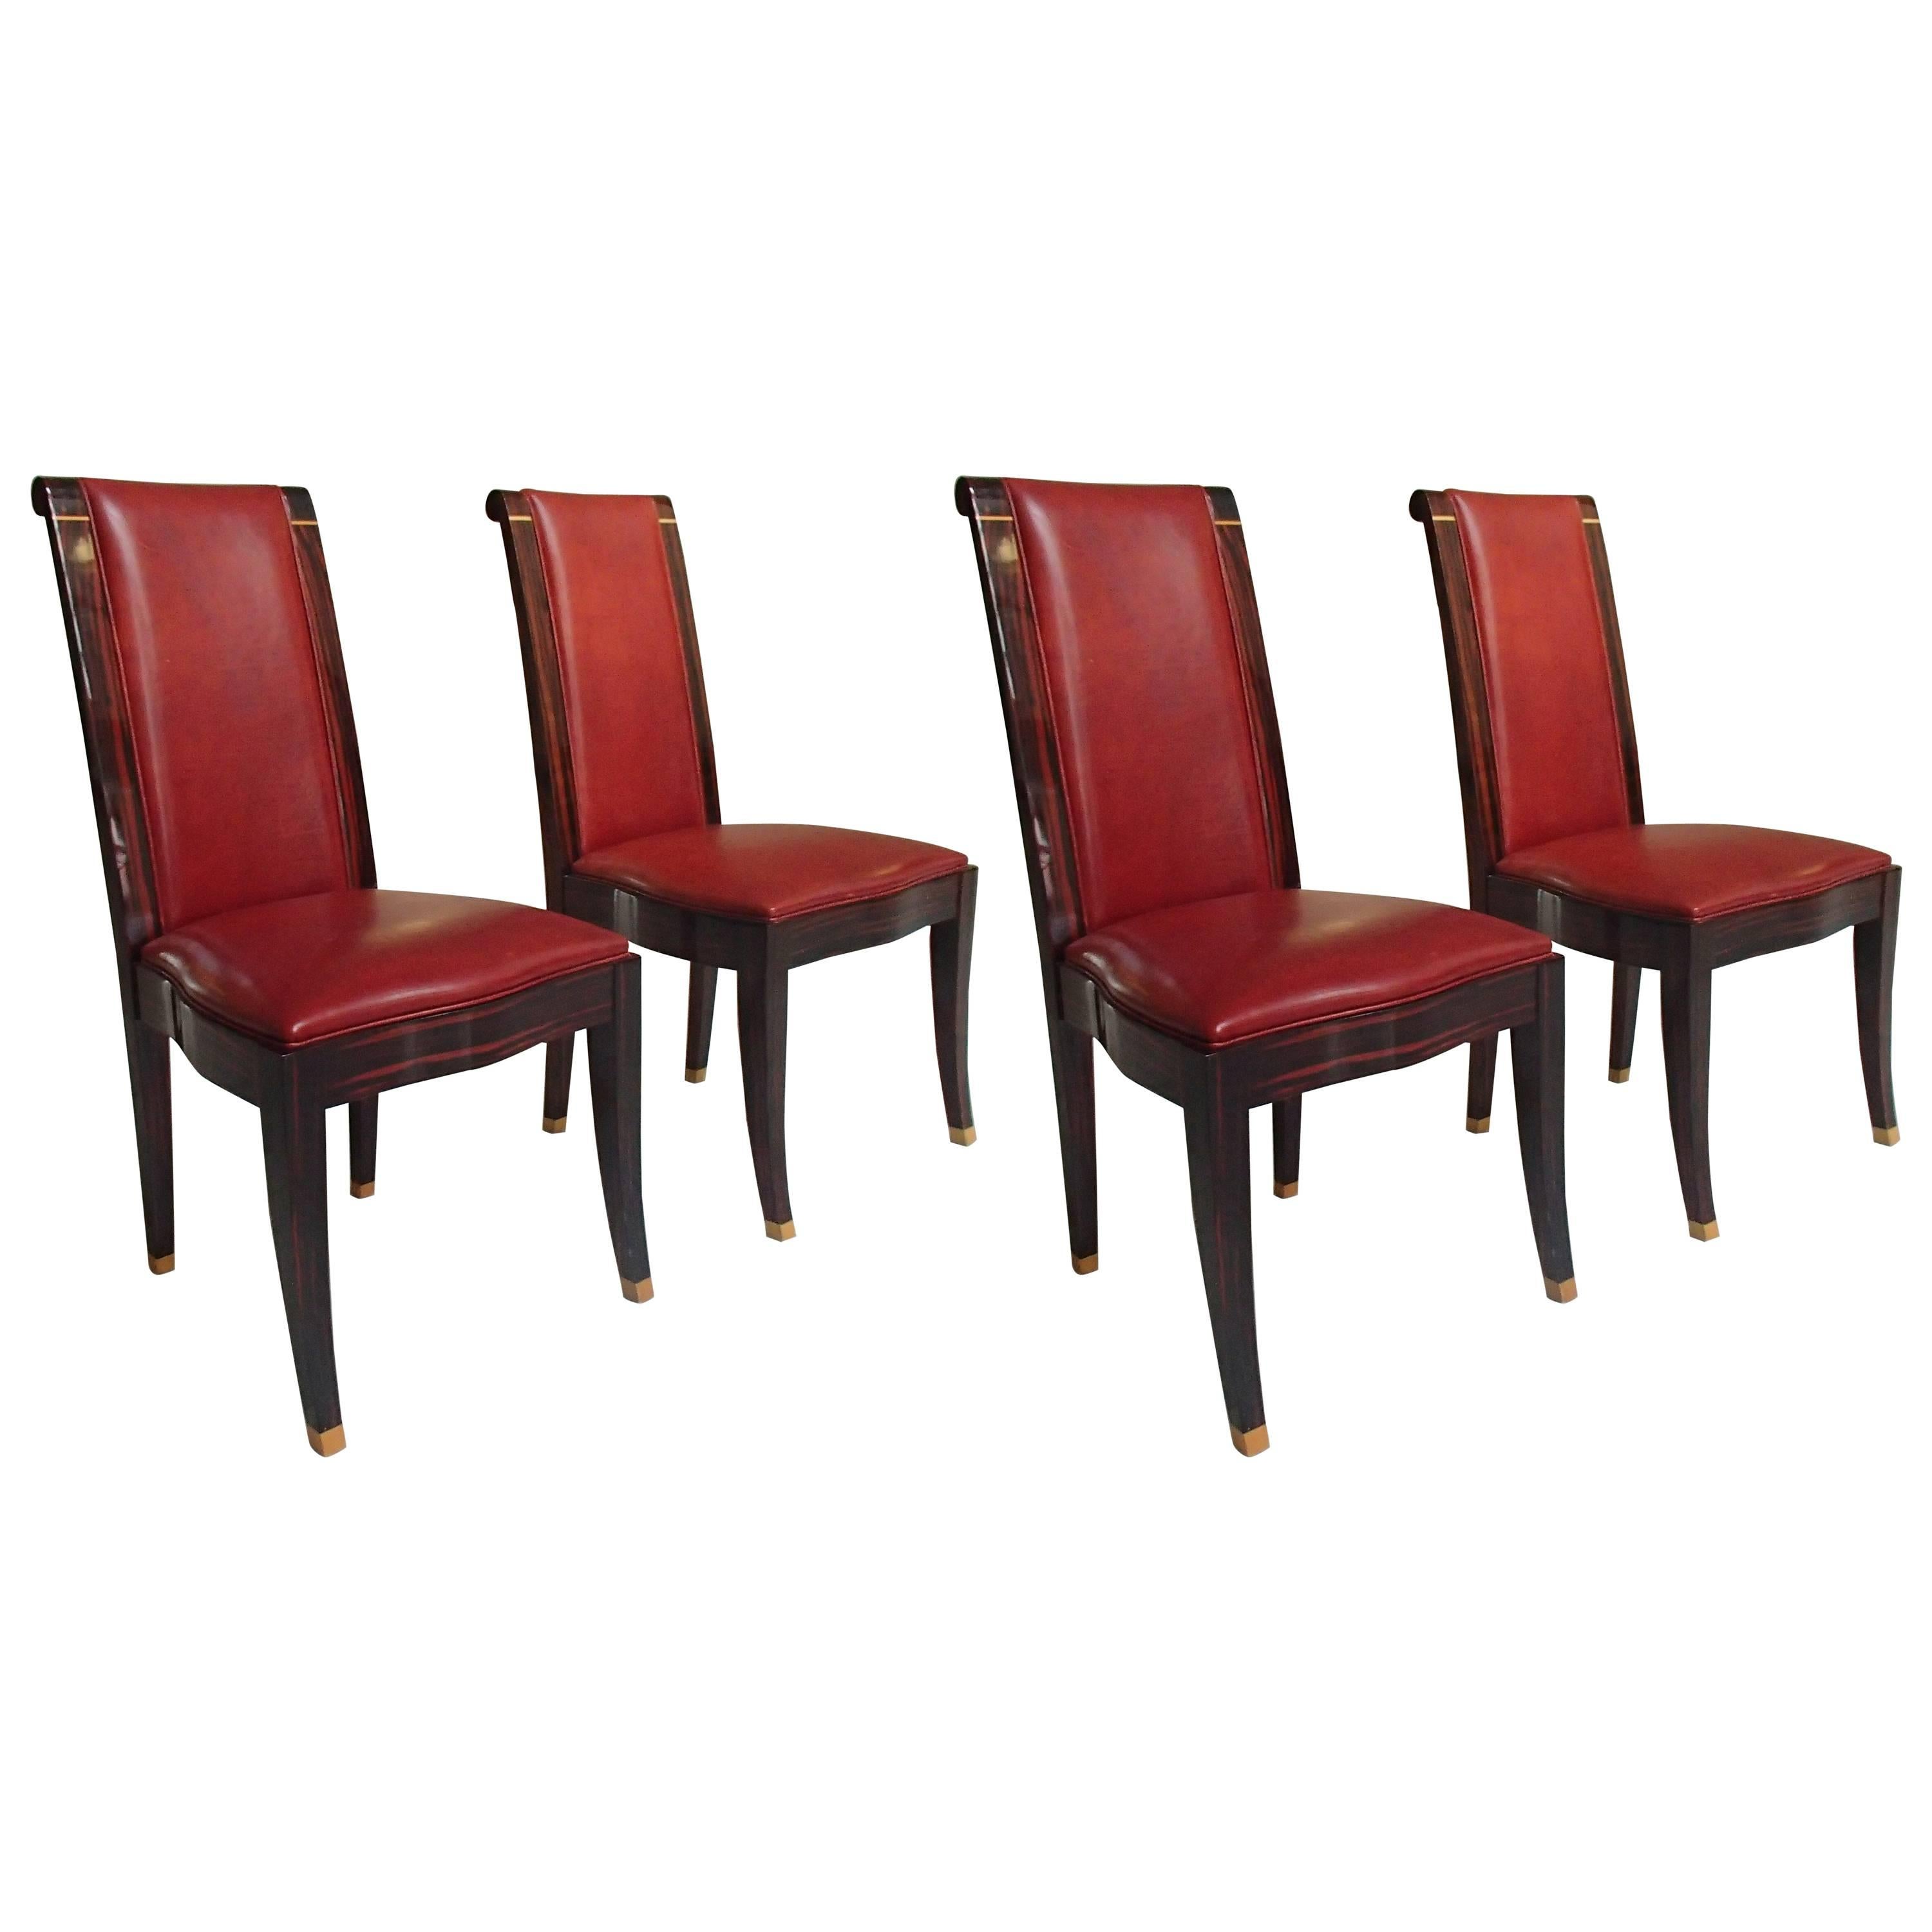 Four Art Deco Dinning Chairs Ebene de Macassar and Red Leather For Sale